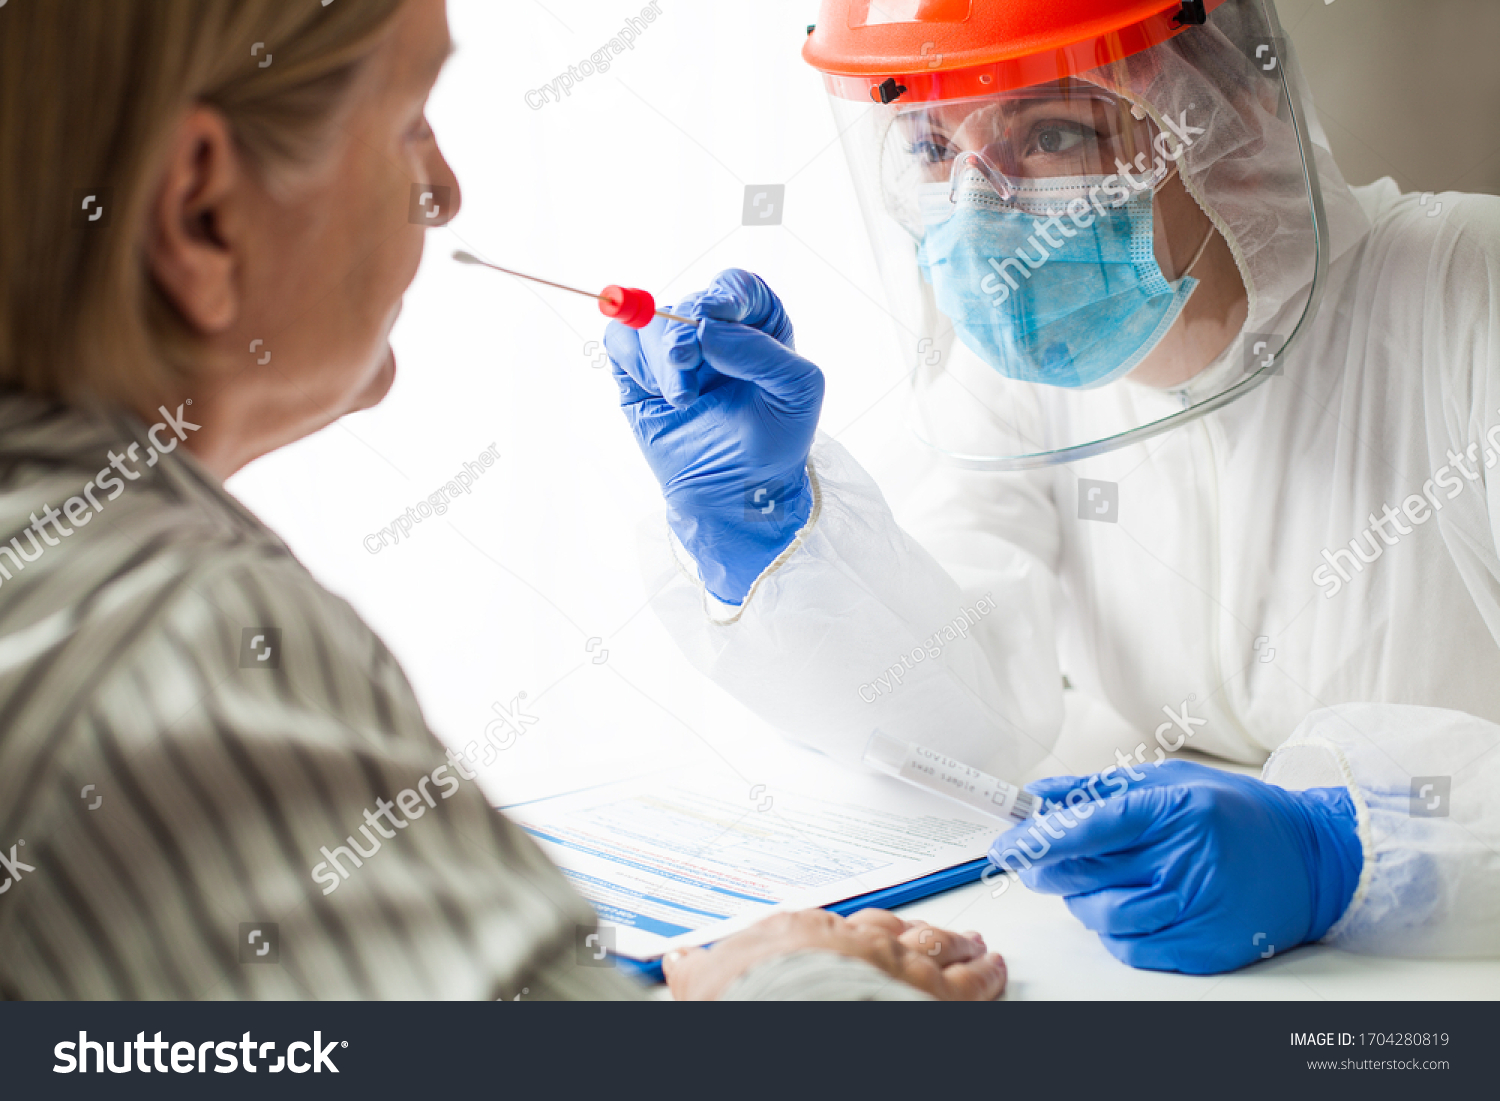 Physician wearing personal protective equipment performing a Coronavirus COVID-19 PCR test, patient nasal NP and oral OP swab sample specimen collection process, viral rt-PCR DNA diagnostic procedure #1704280819